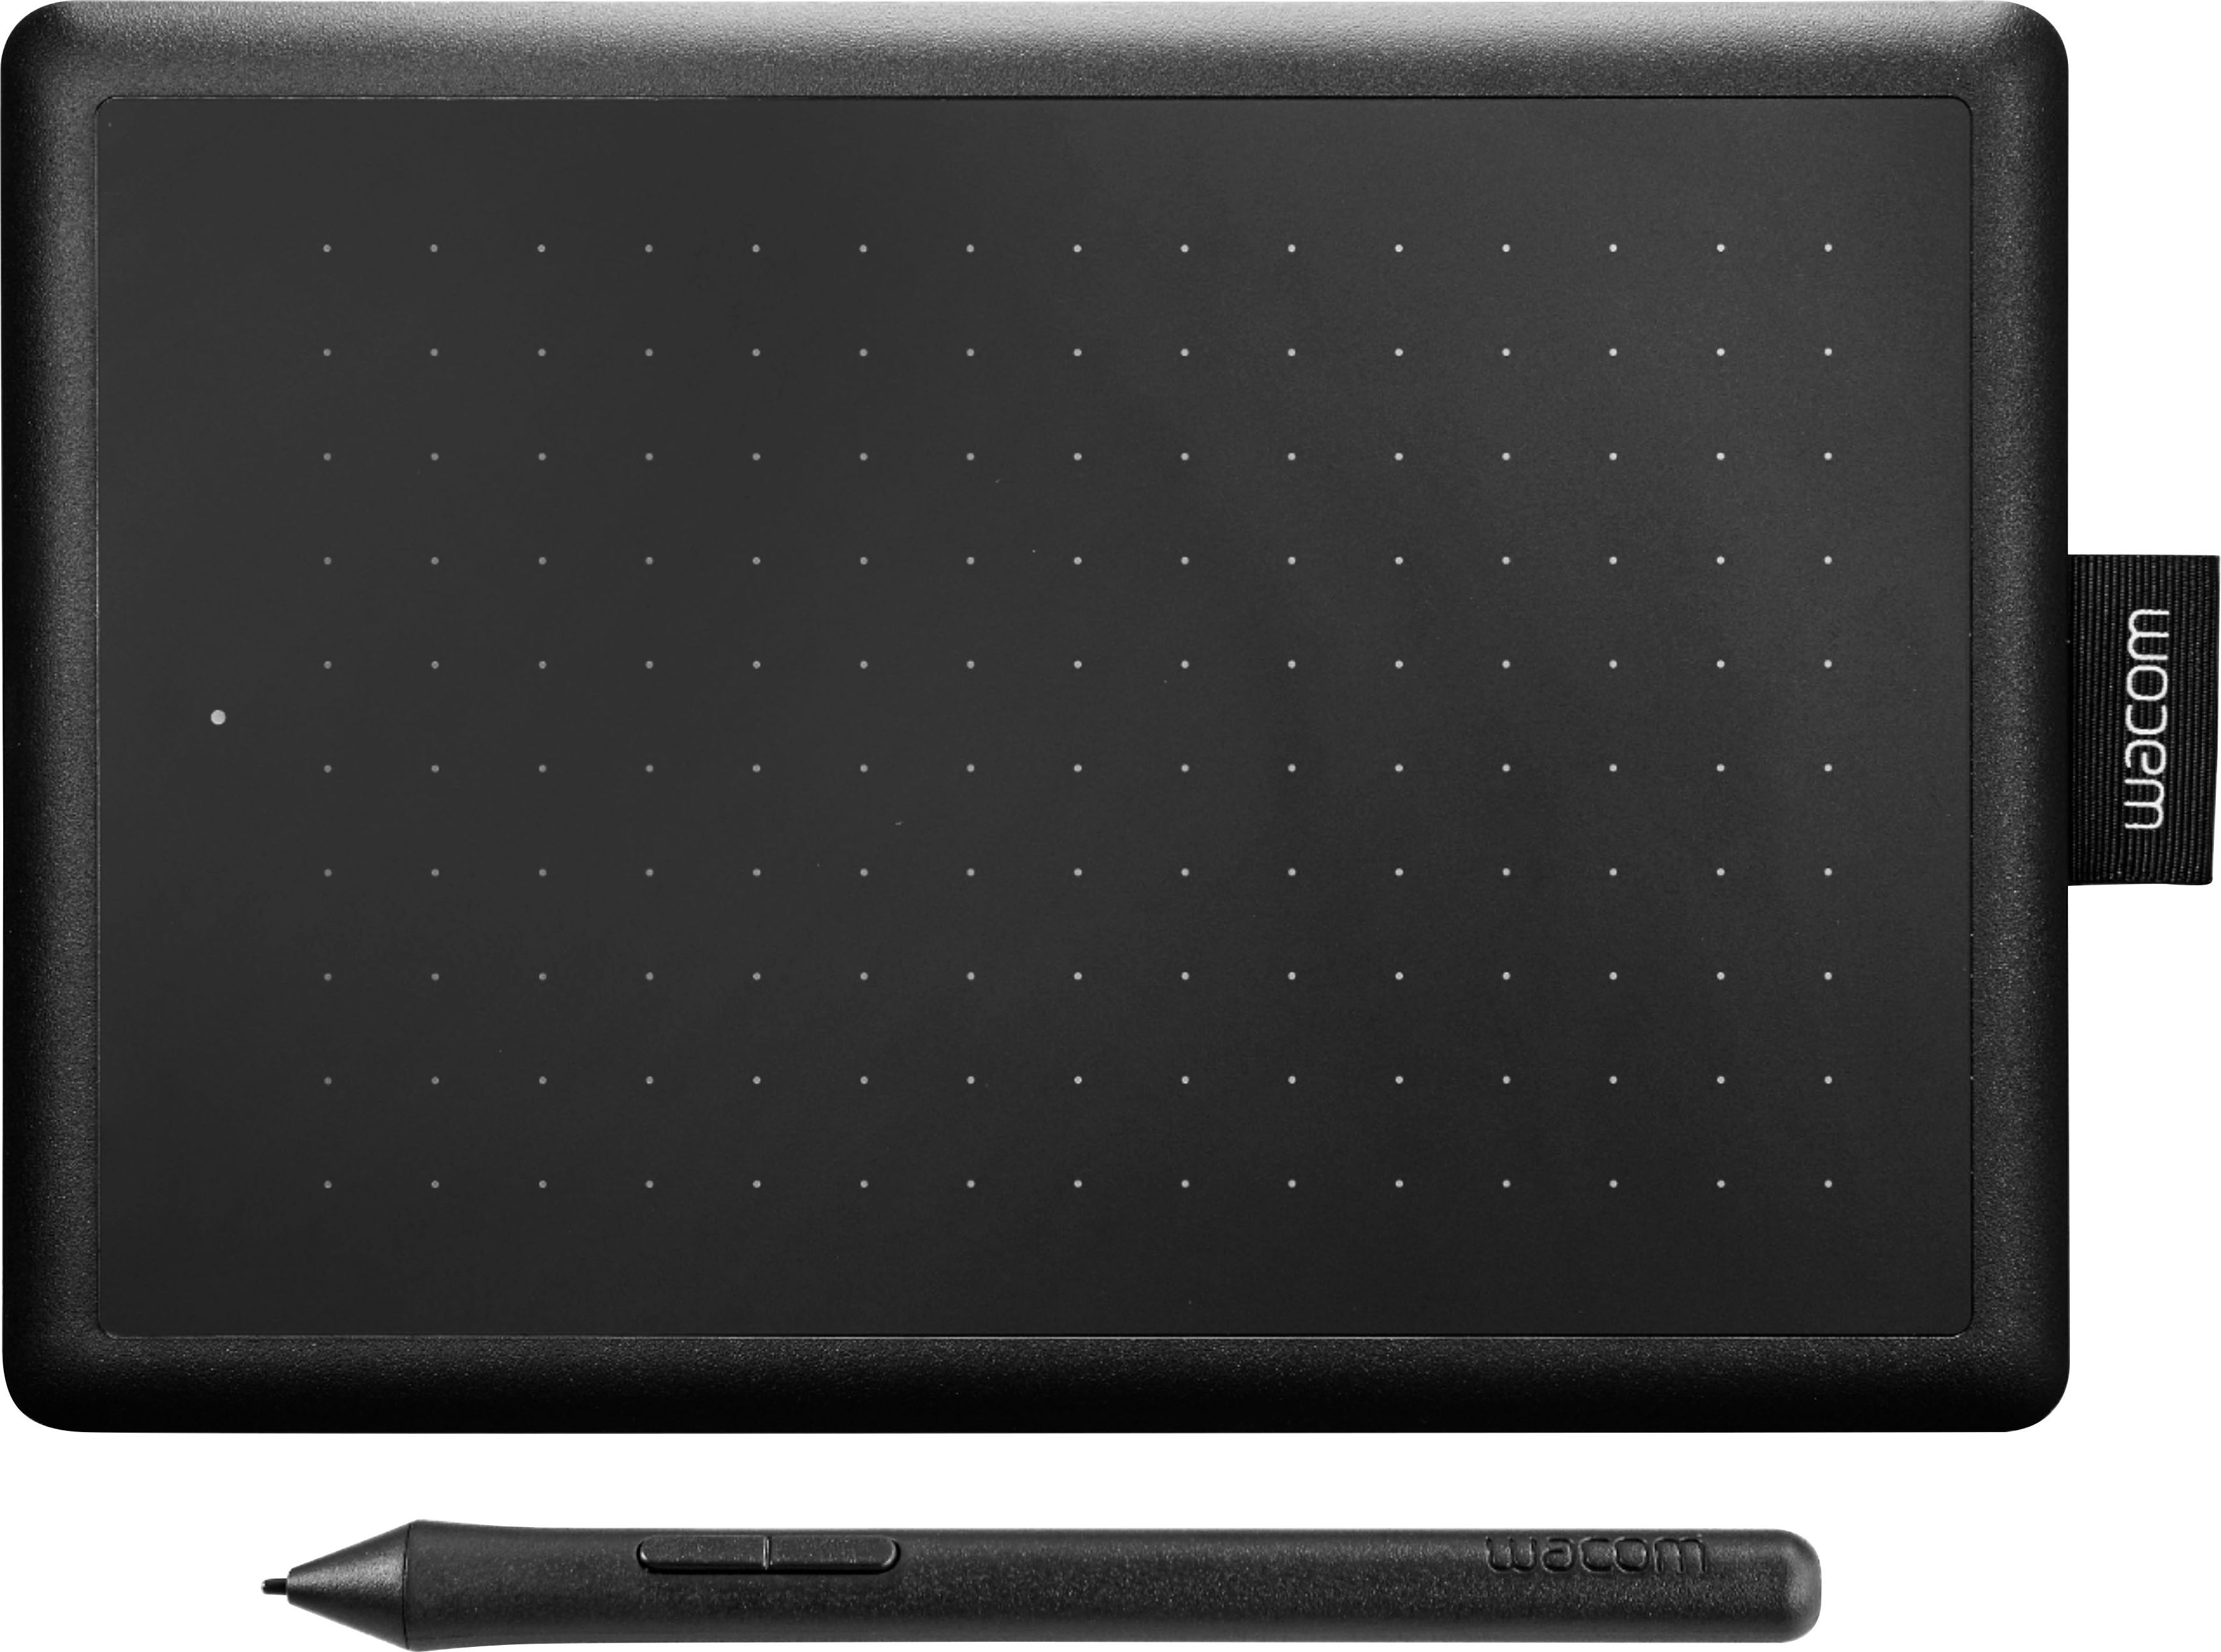 simbans picassotab 10 inch drawing tablet and stylus pen - Best Buy